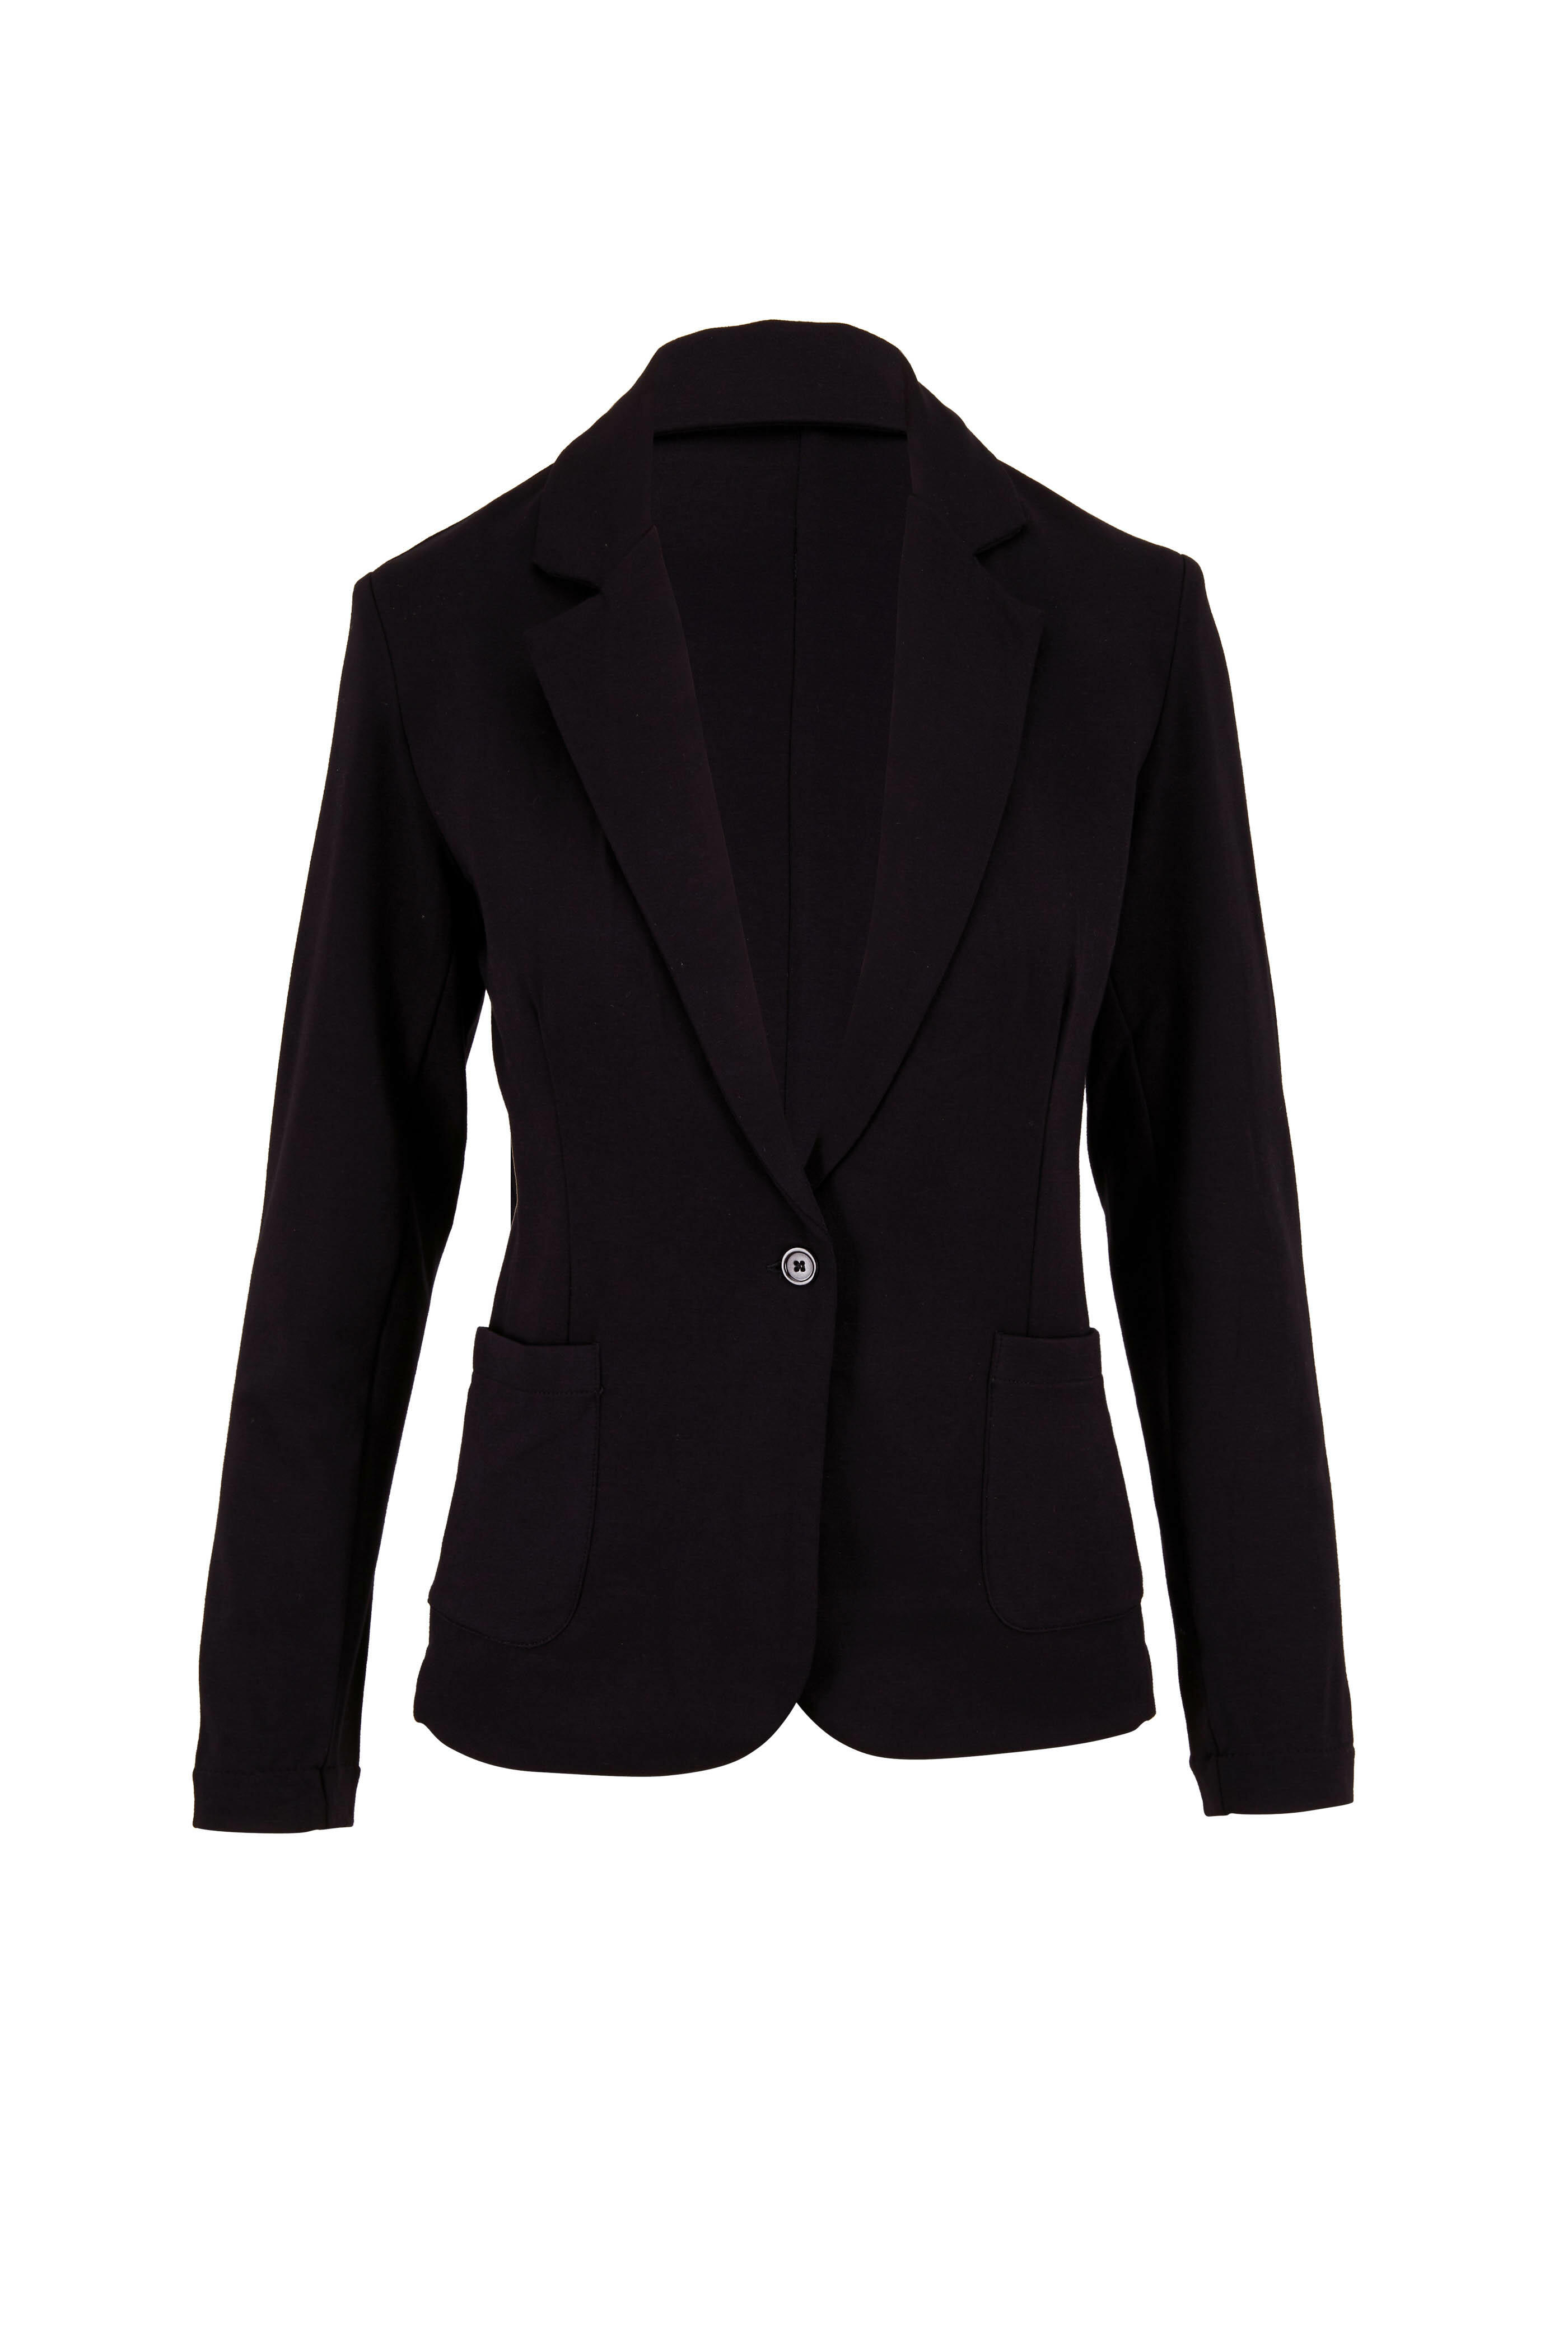 Majestic - Black French Touch One Button Blazer | Mitchell Stores